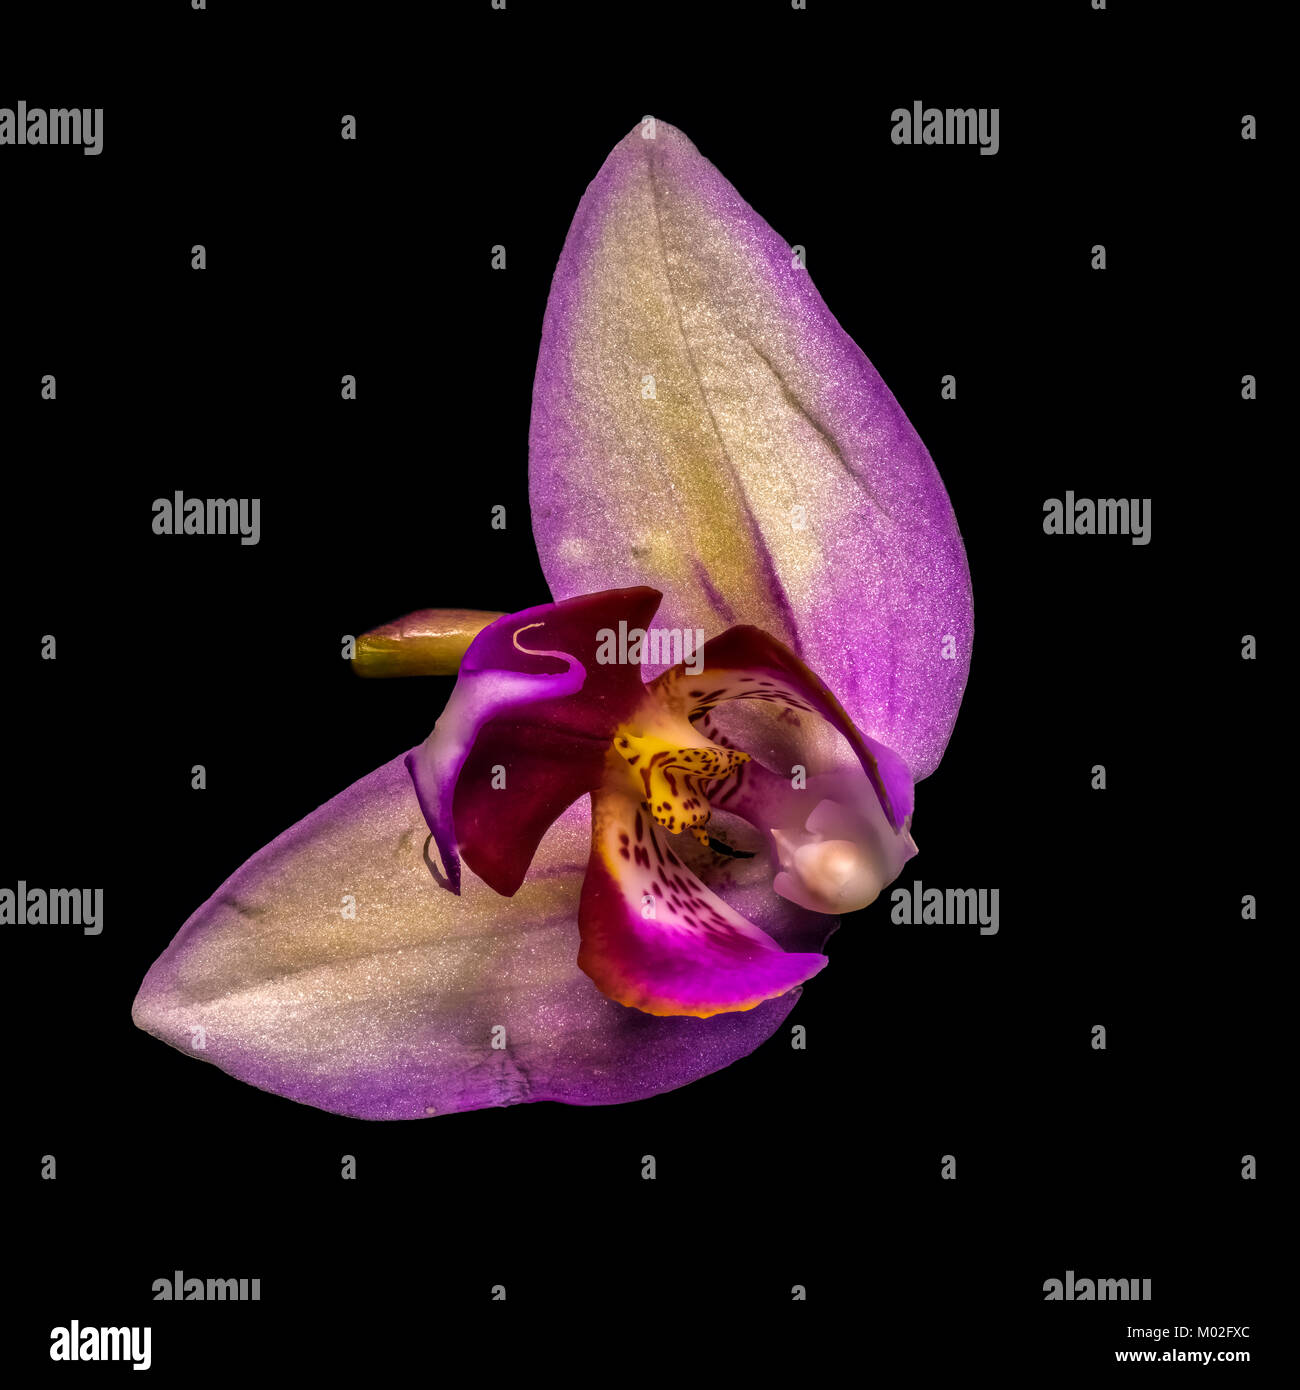 Fine art still life floral bright colorful macro flower portrait of an isolated single violet yellow blooming orchid blossom on black background Stock Photo